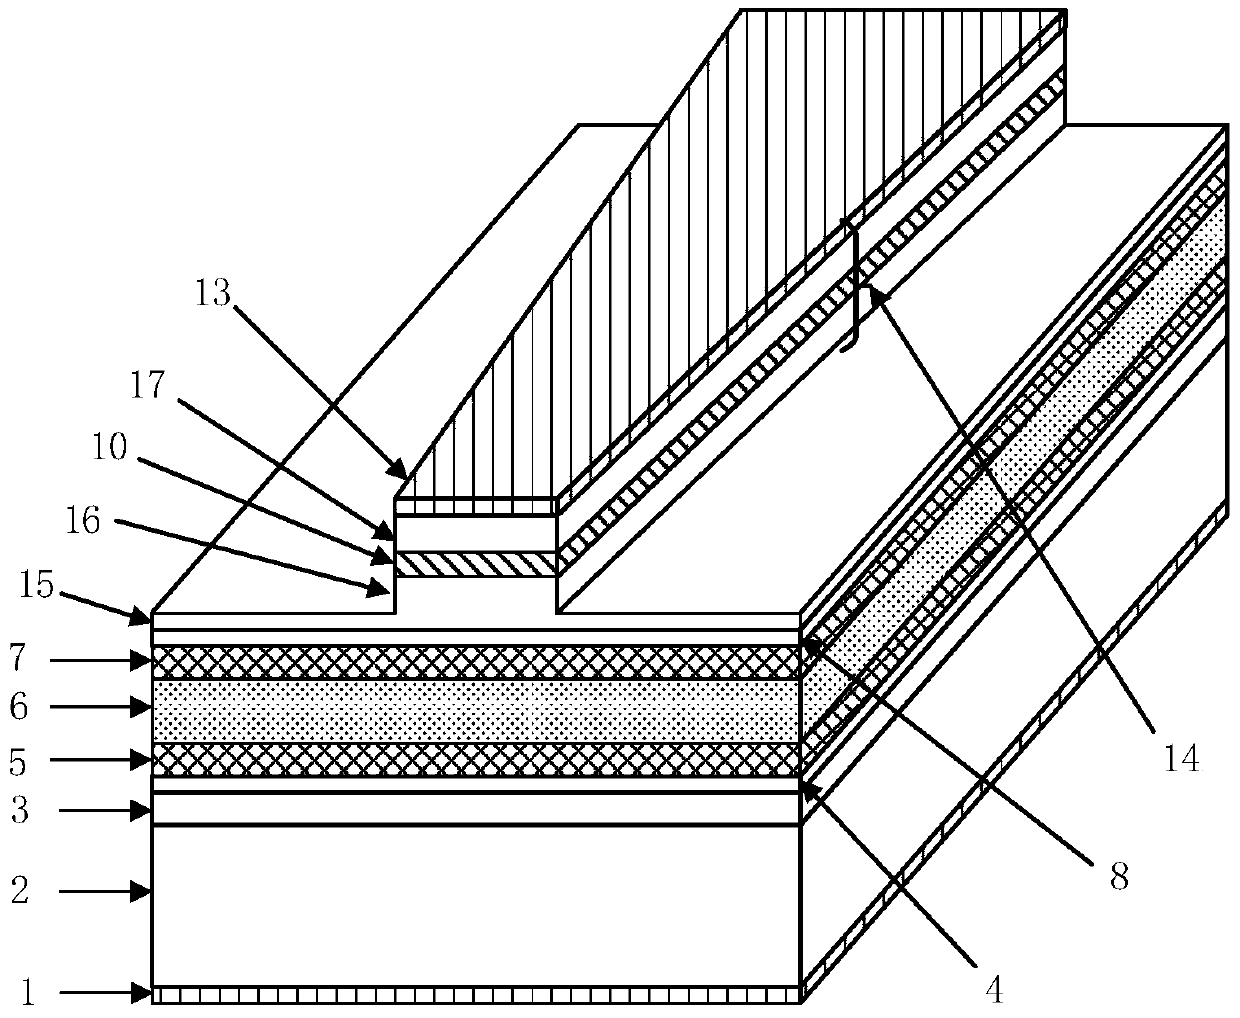 A Graded Ridge Waveguide Distributed Feedback Laser with High Single-Mode Yield